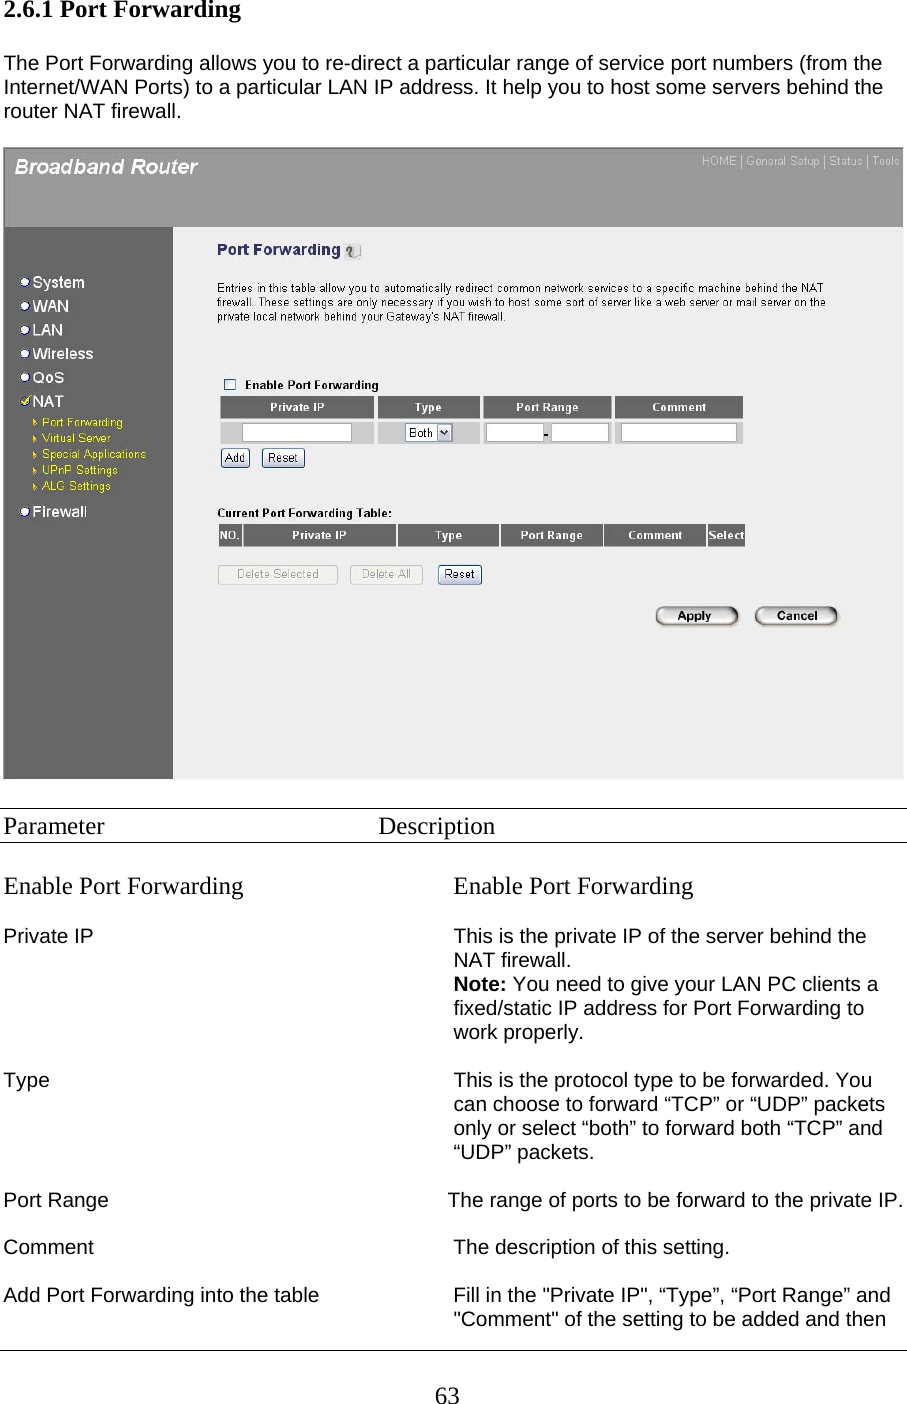 2.6.1 Port Forwarding  The Port Forwarding allows you to re-direct a particular range of service port numbers (from the Internet/WAN Ports) to a particular LAN IP address. It help you to host some servers behind the router NAT firewall.    Parameter    Description  Enable Port Forwarding  Enable Port Forwarding  Private IP  This is the private IP of the server behind the NAT firewall.  Note: You need to give your LAN PC clients a fixed/static IP address for Port Forwarding to work properly.  Type  This is the protocol type to be forwarded. You can choose to forward “TCP” or “UDP” packets only or select “both” to forward both “TCP” and “UDP” packets.  Port Range  The range of ports to be forward to the private IP.  Comment  The description of this setting.  Add Port Forwarding into the table  Fill in the &quot;Private IP&quot;, “Type”, “Port Range” and &quot;Comment&quot; of the setting to be added and then  63